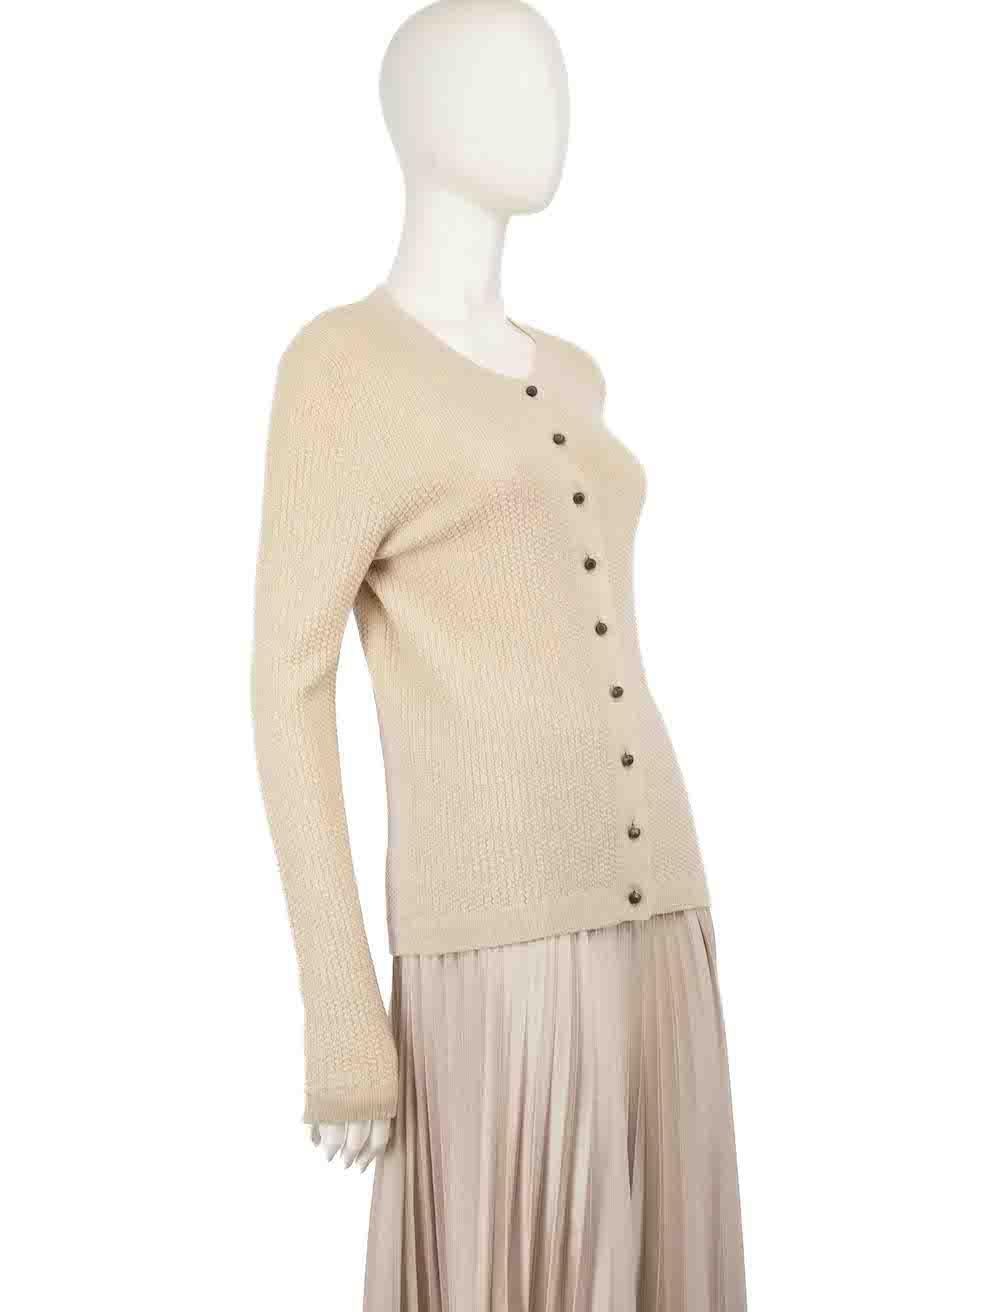 CONDITION is Very good. Minimal wear to cardigan is evident. Minimal pilling to overall material especially around hemline and a pluck to the weave on the front can be seen on this used Balenciaga designer resale item.
 
 
 
 Details
 
 
 Beige
 
